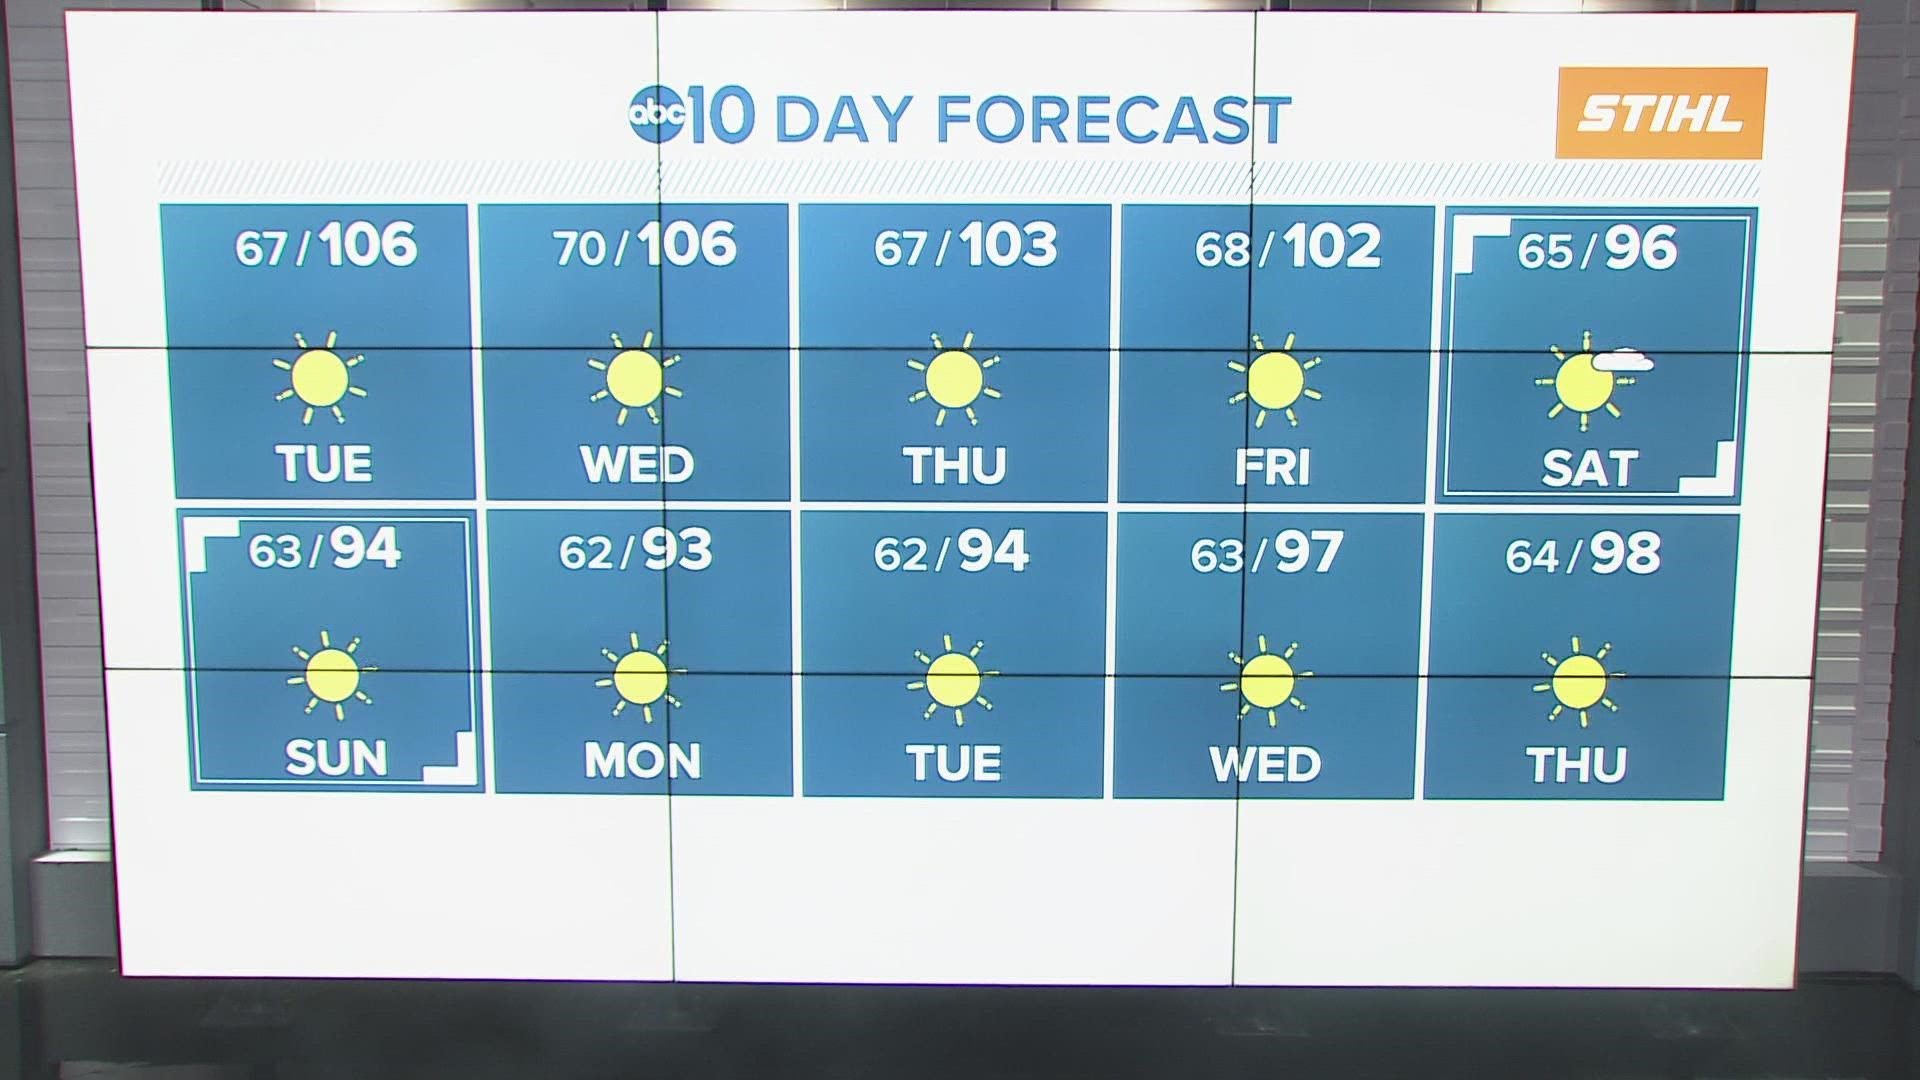 ABC10 Chief Meteorologist Monica Woods tells us what to expect for the next 10 days of weather